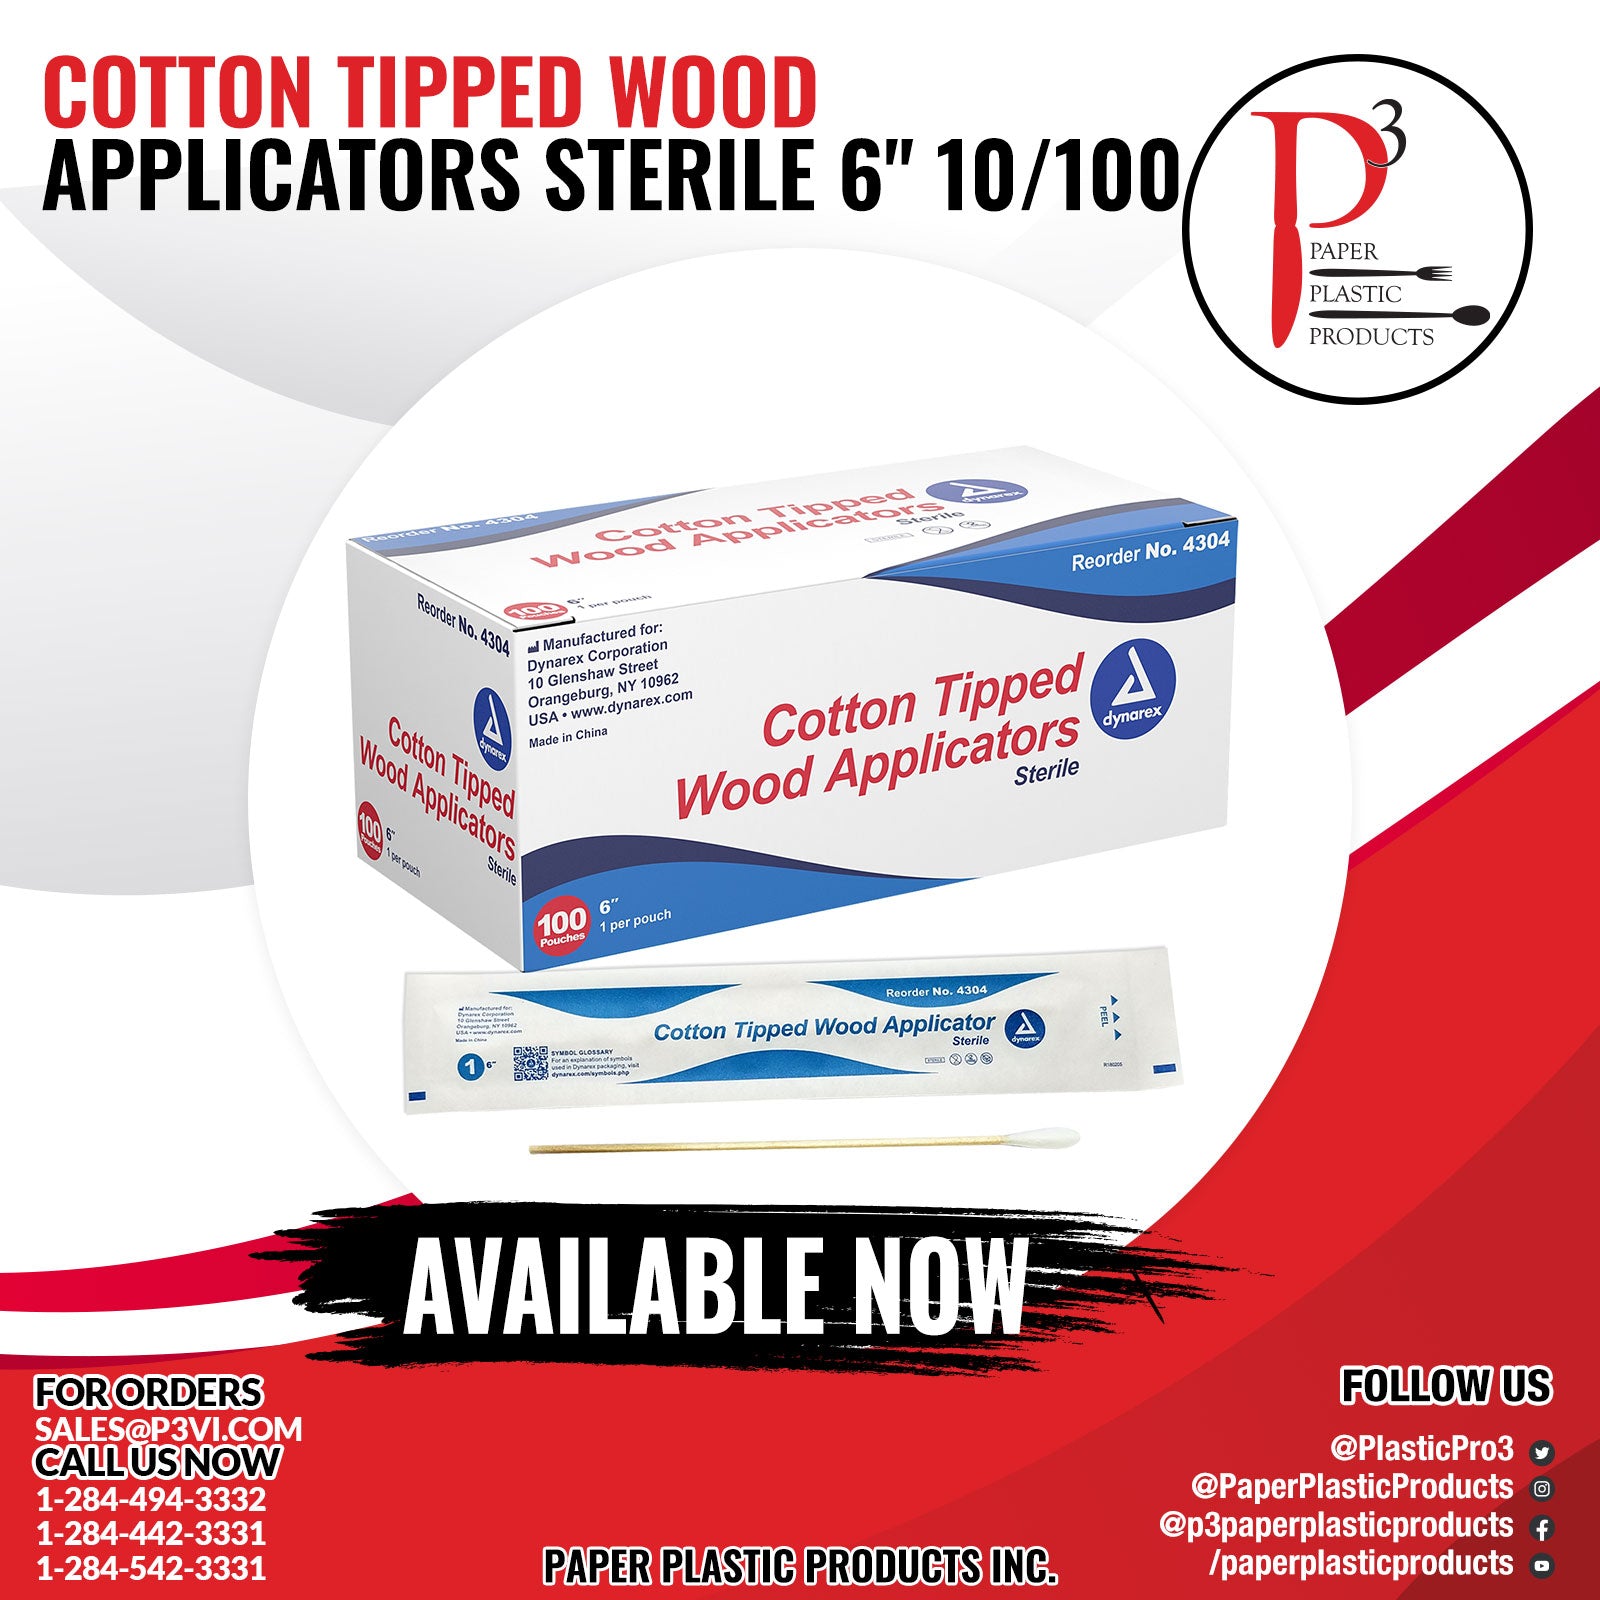 Cotton Tipped Wood Applicators Sterile 6" 10/100